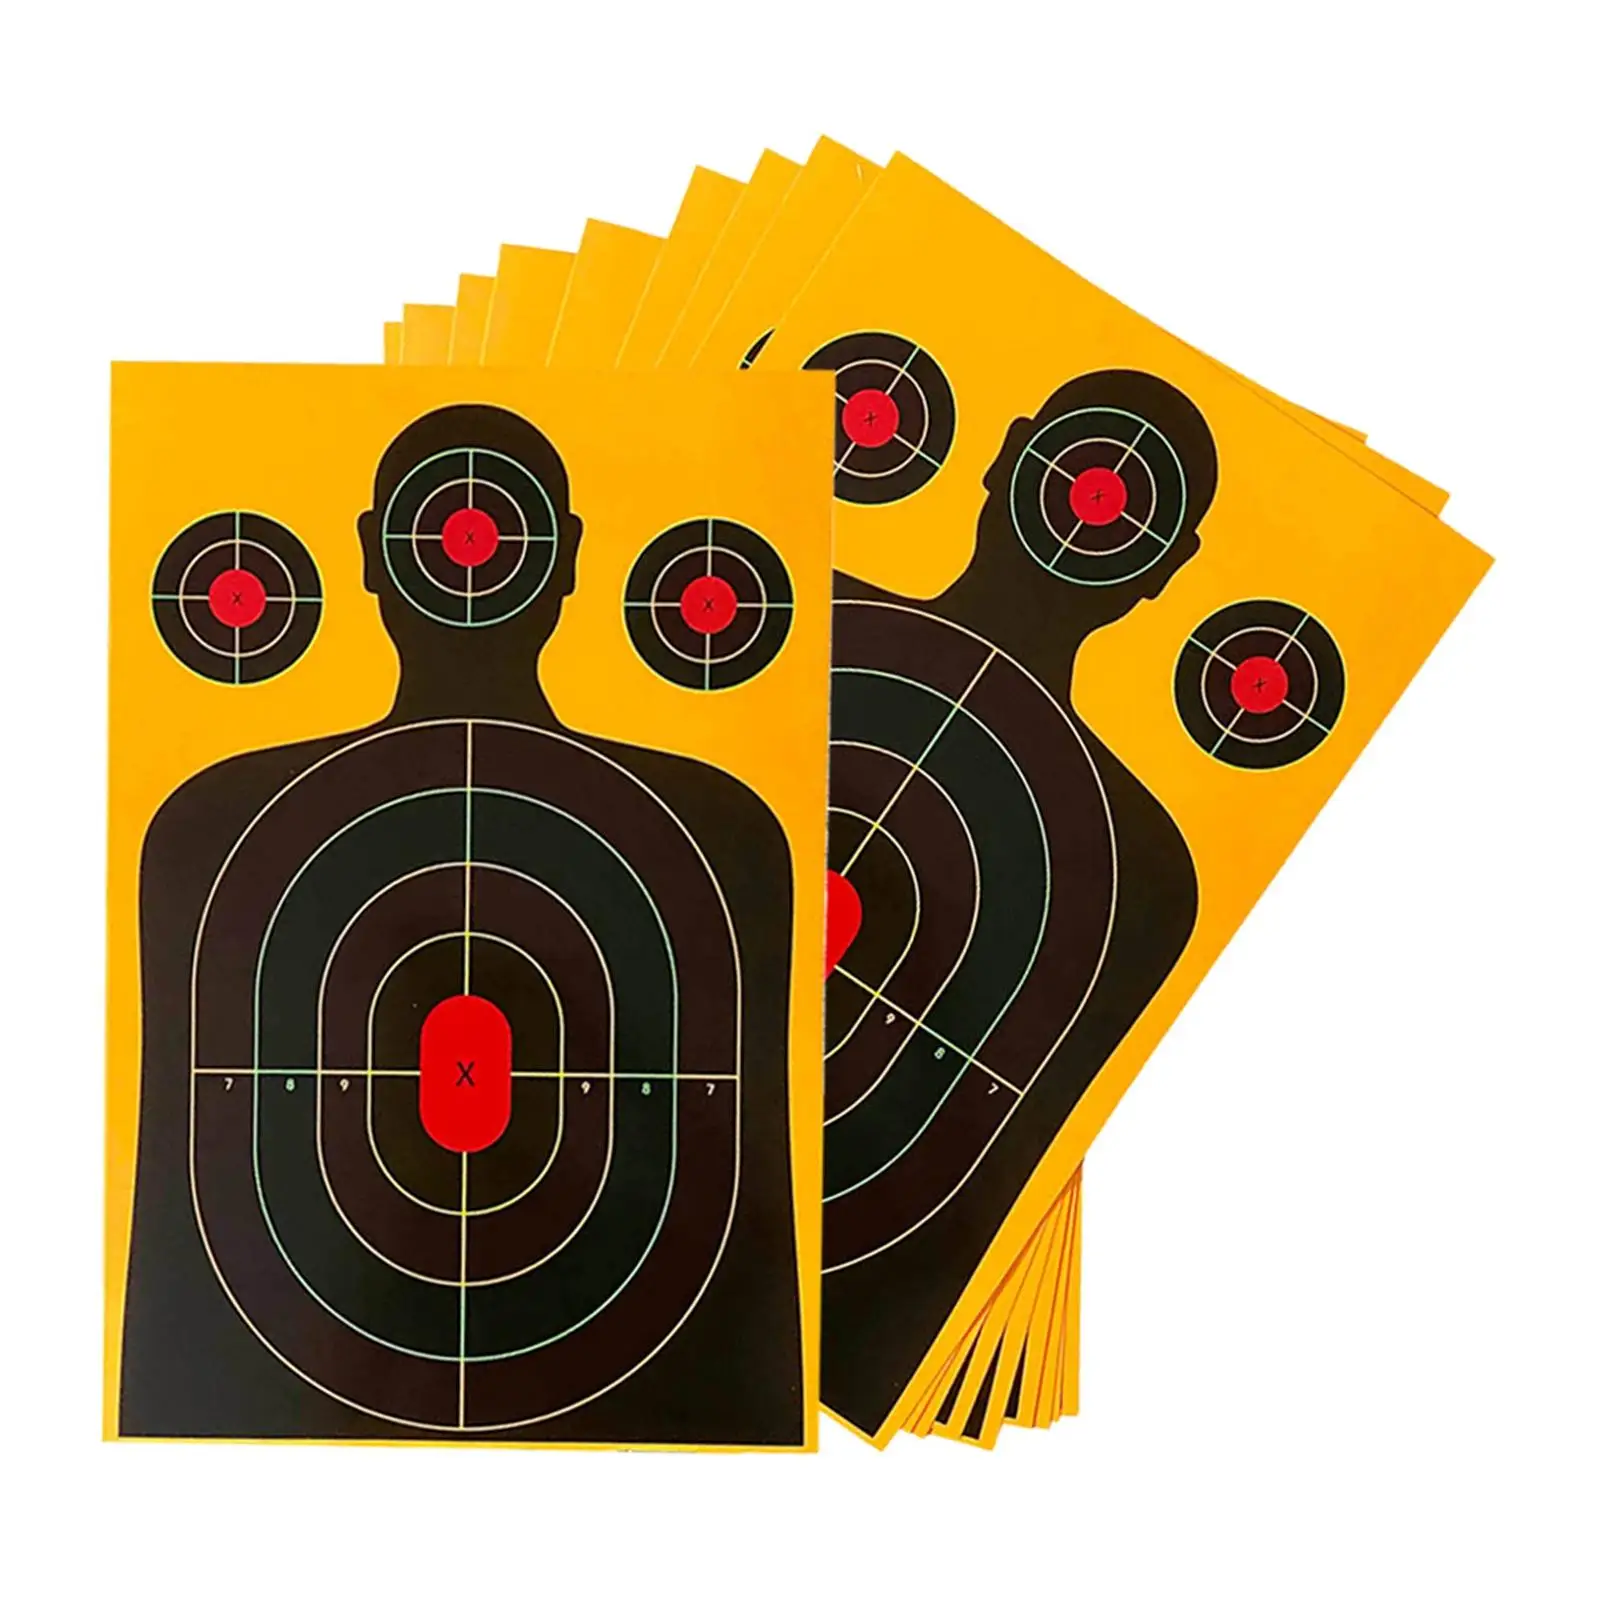 10Pcs Silhouette Target Target Paper Professional Sturdy Hunting Target Training